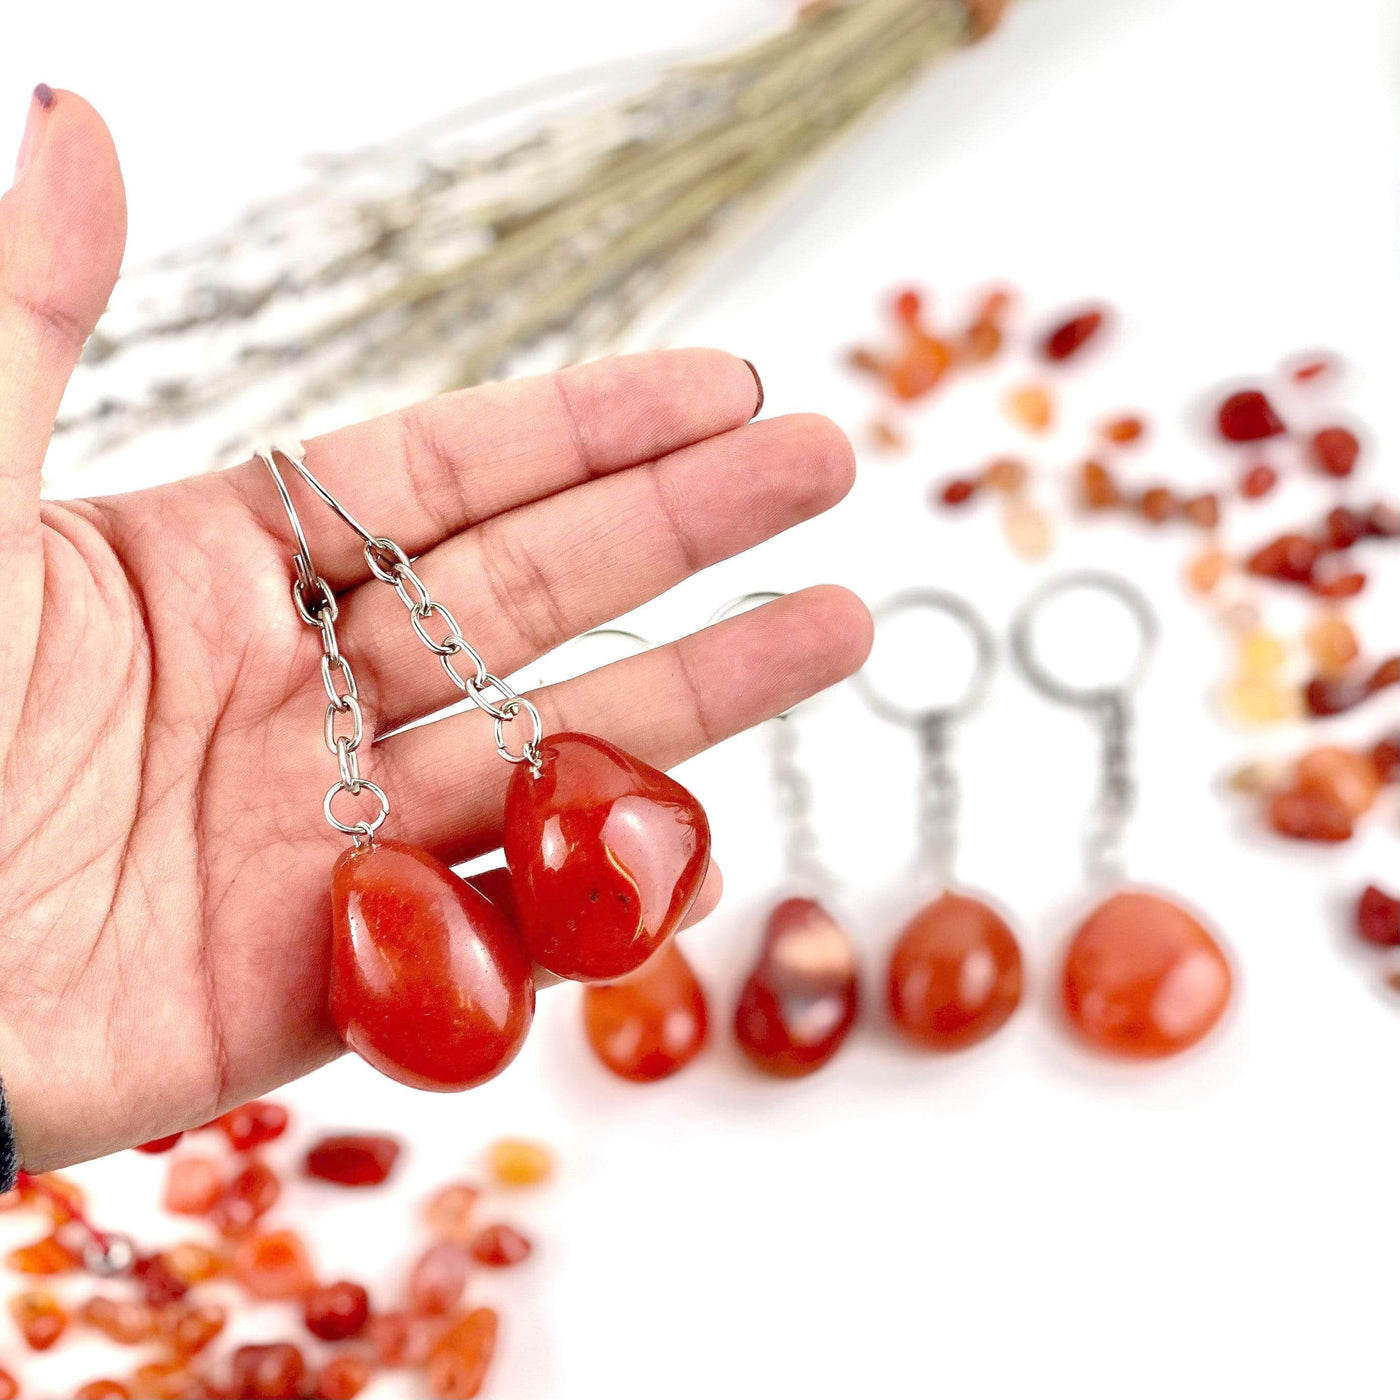 2 carnelian keychains in a hand